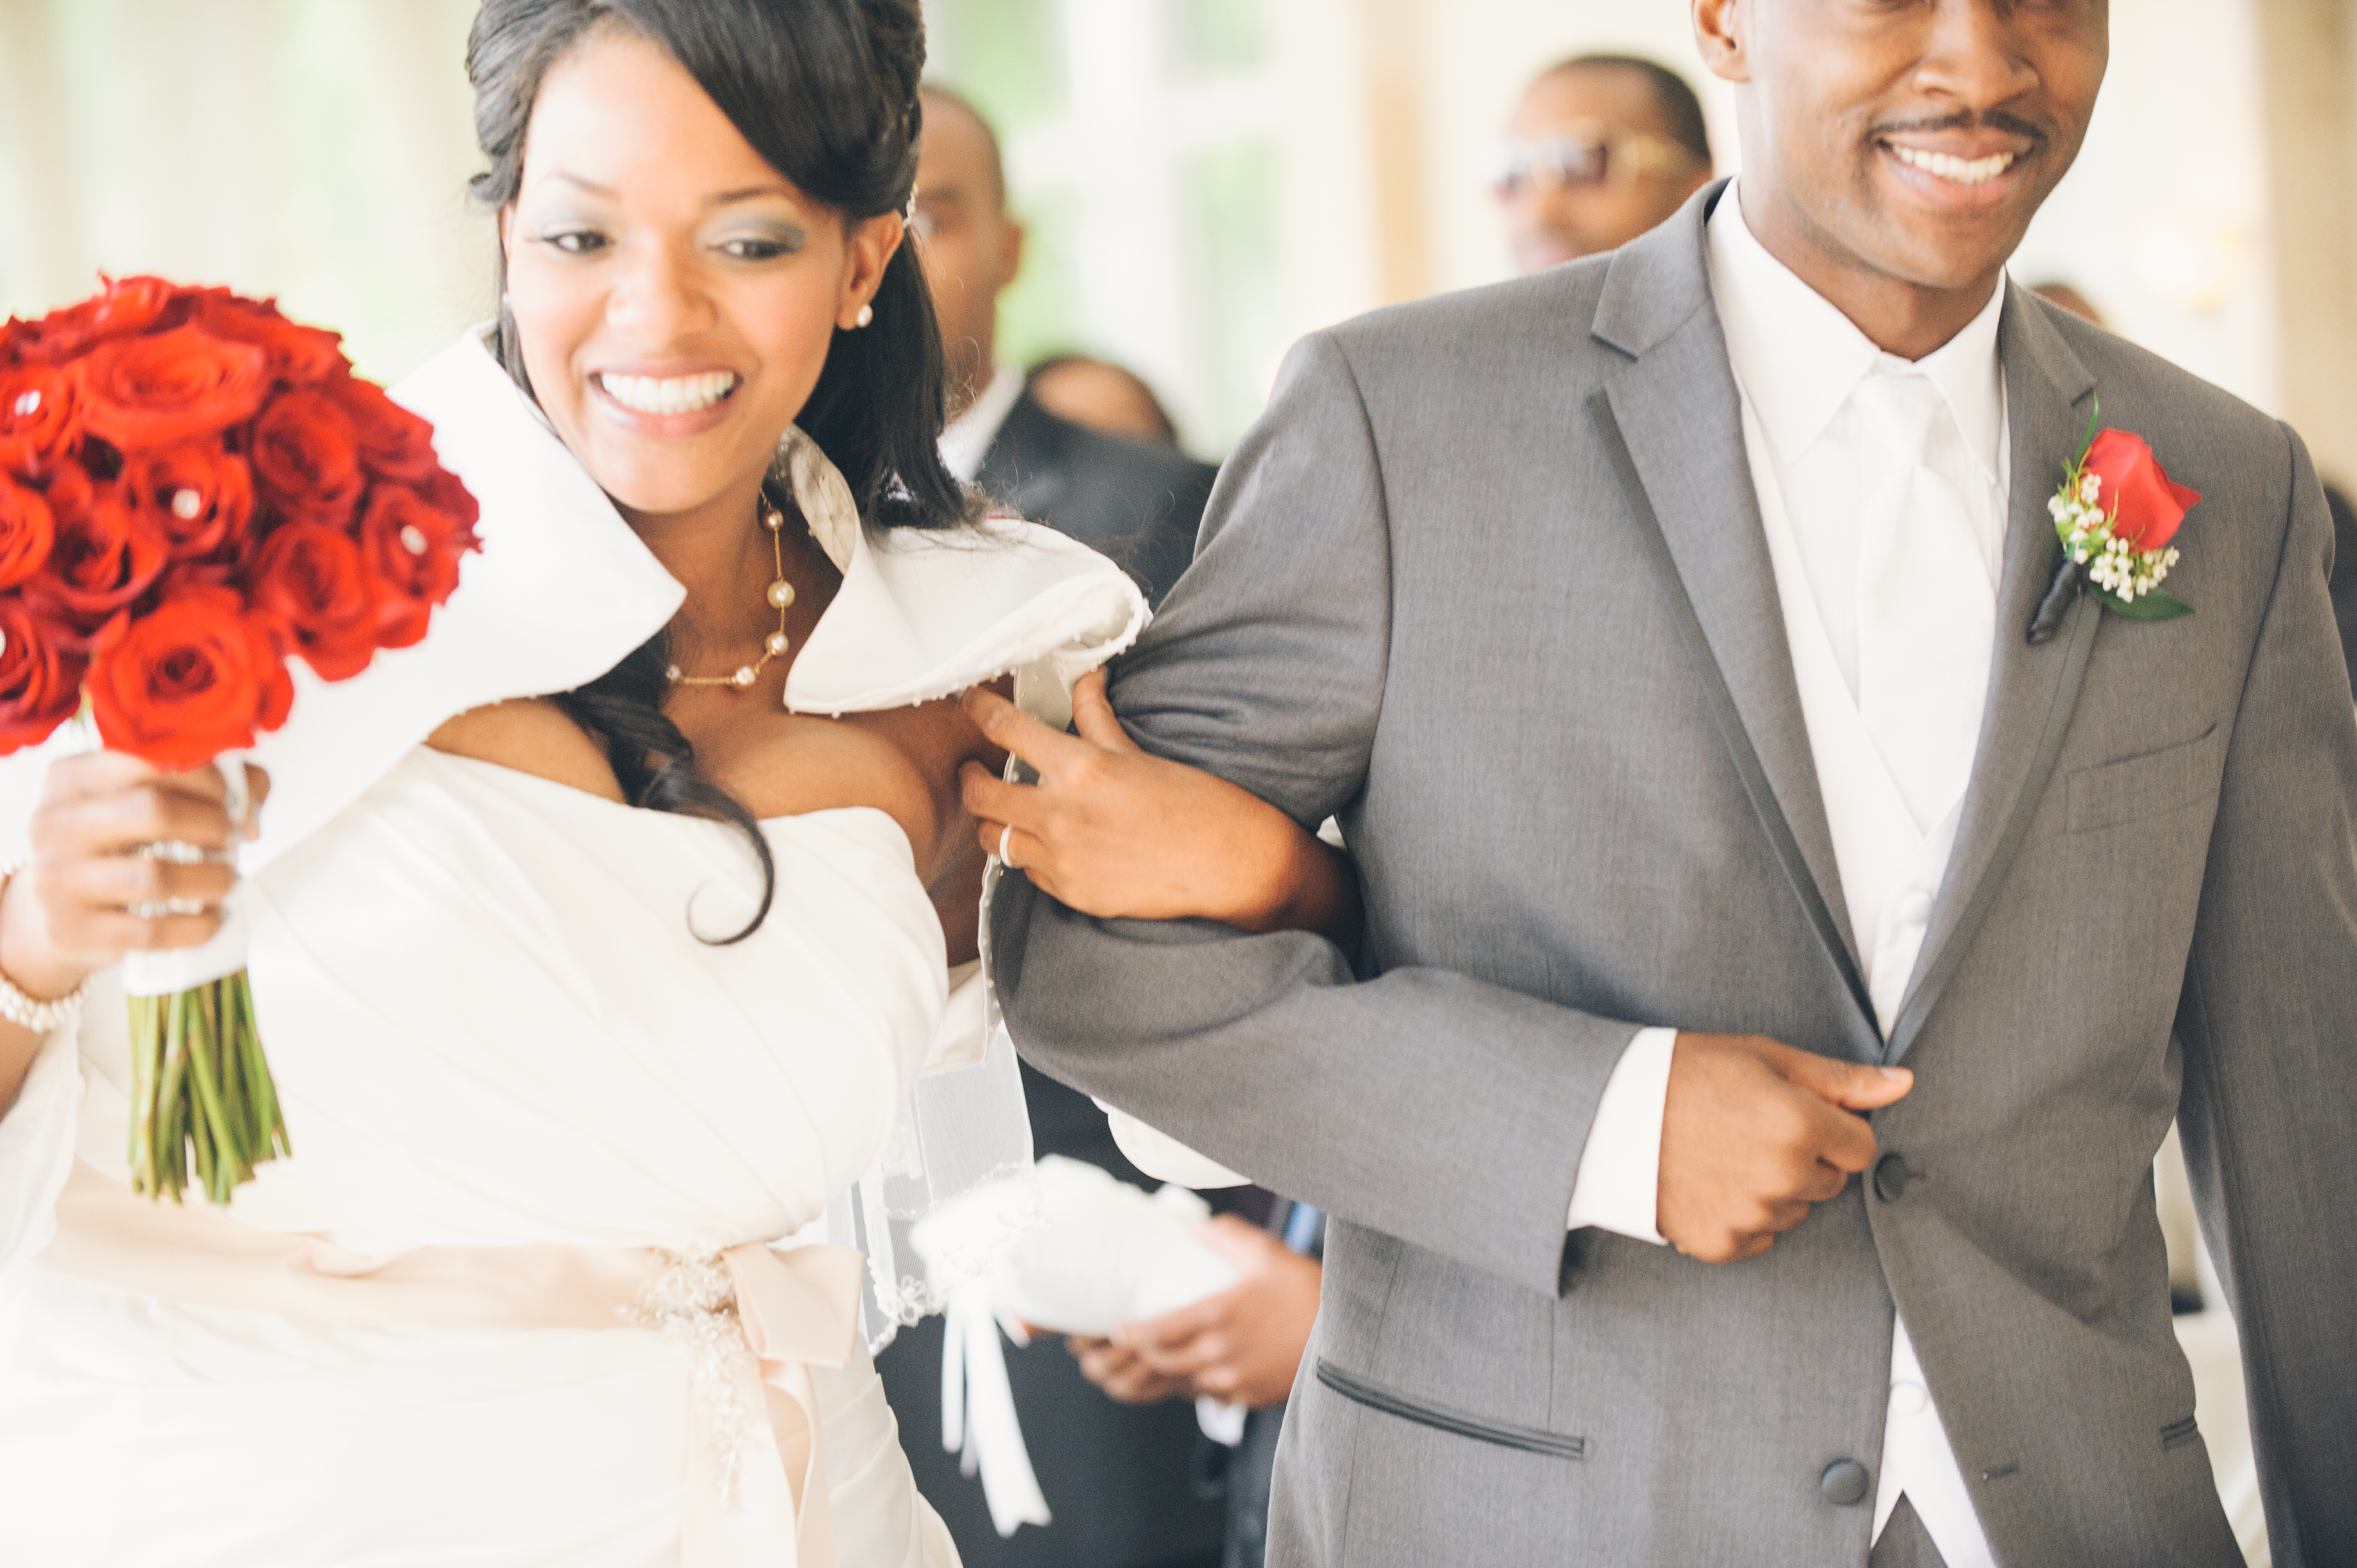 African American bride and groom happily walking back down the aisle after their Atlanta wedding at the Piedmont Room